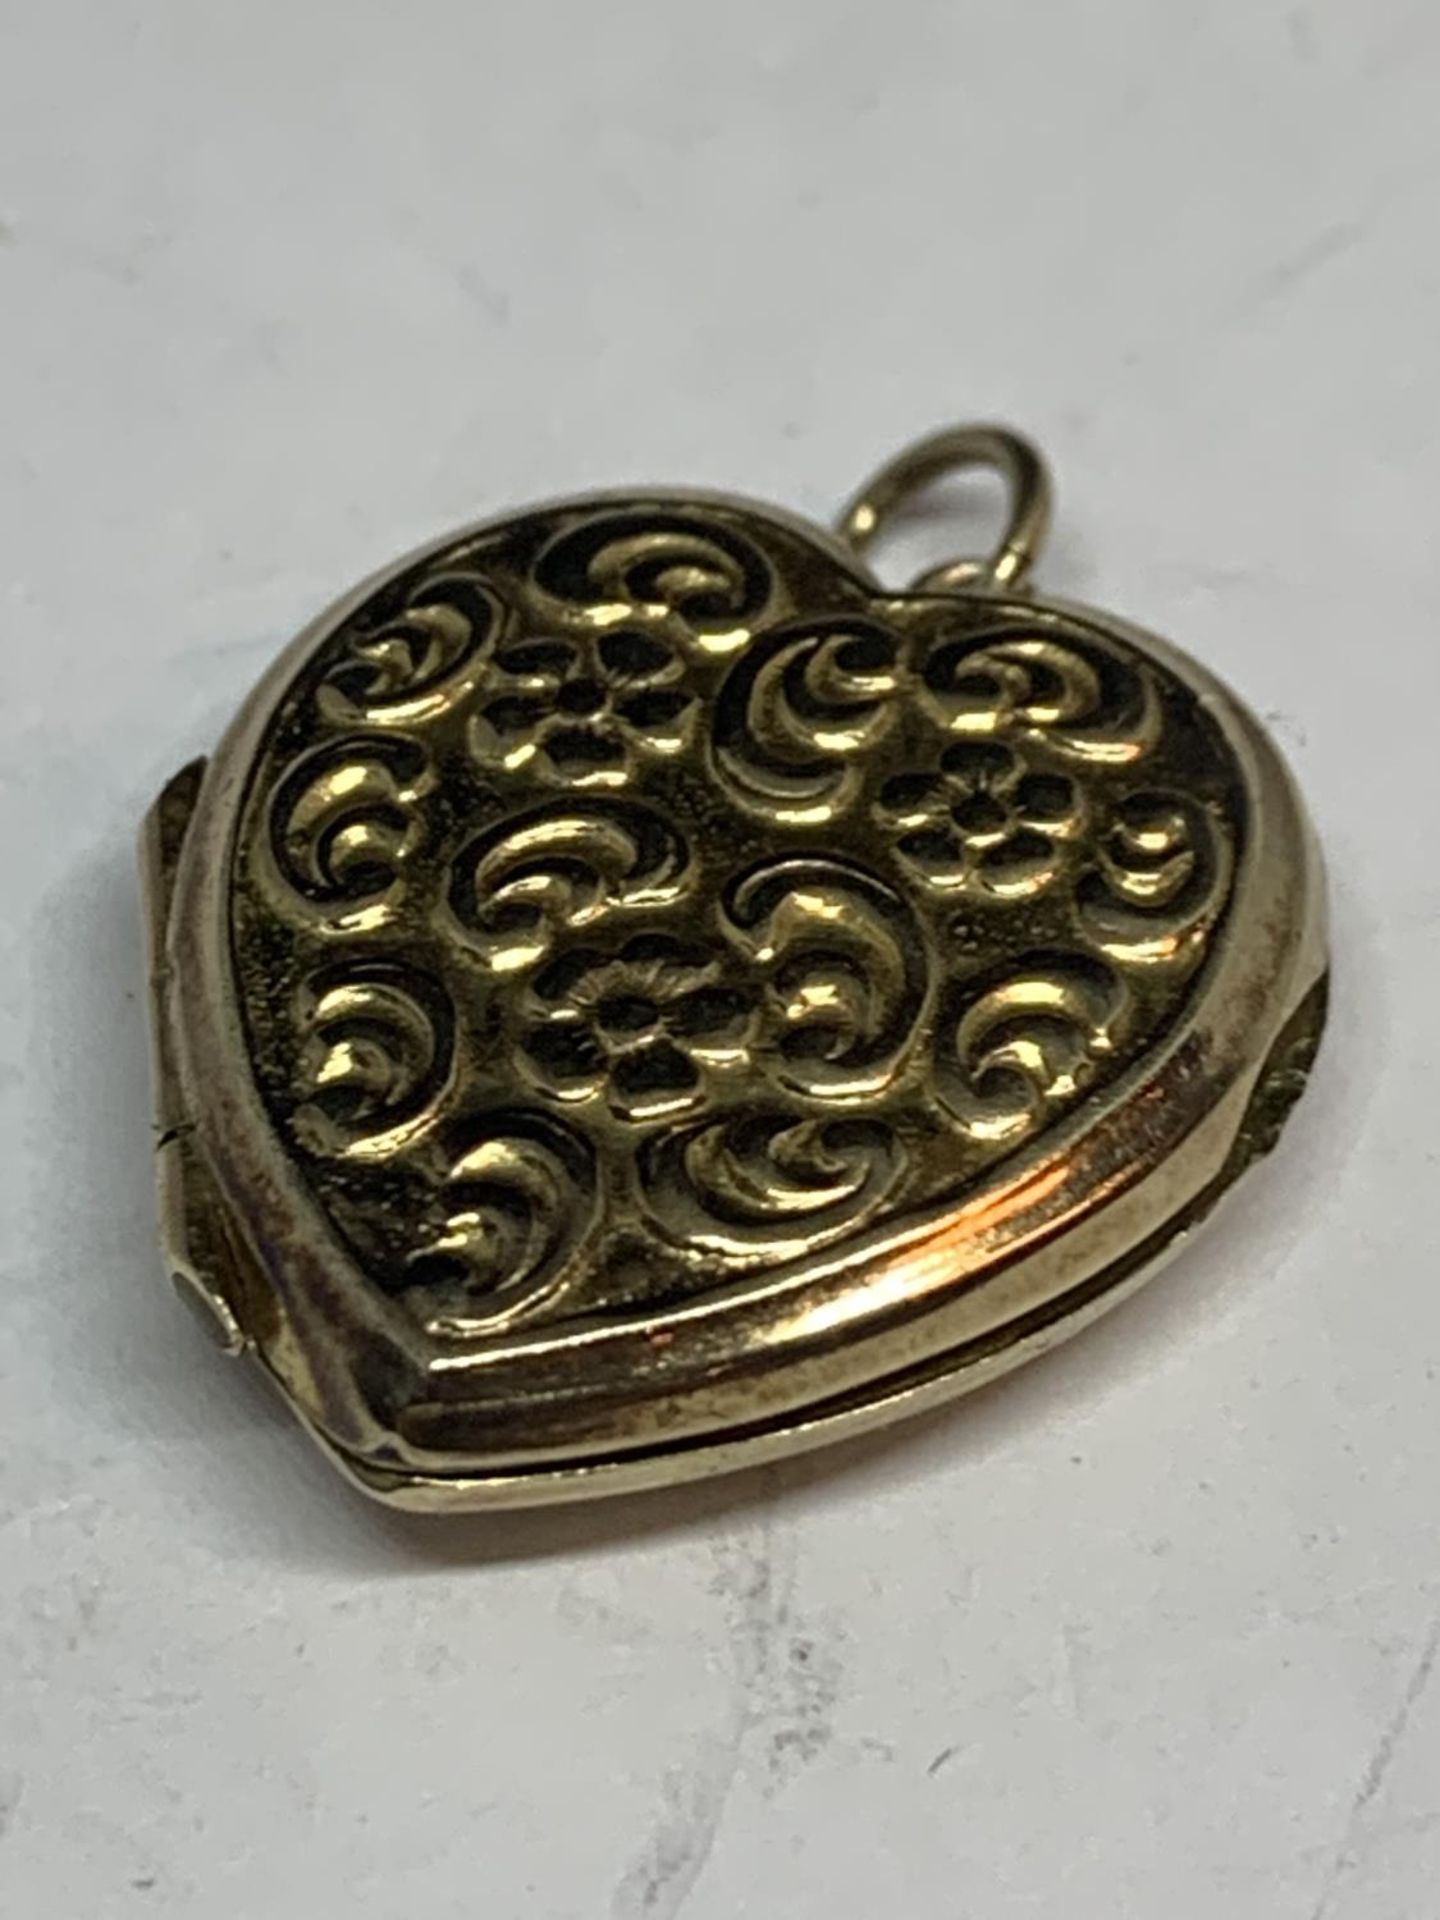 A 9 CARAT GOLD HEART SHAPED LOCKET WITH VINTAGE PHOTOGRAPHS GROSS WEIGHT 3.5 GRAMS